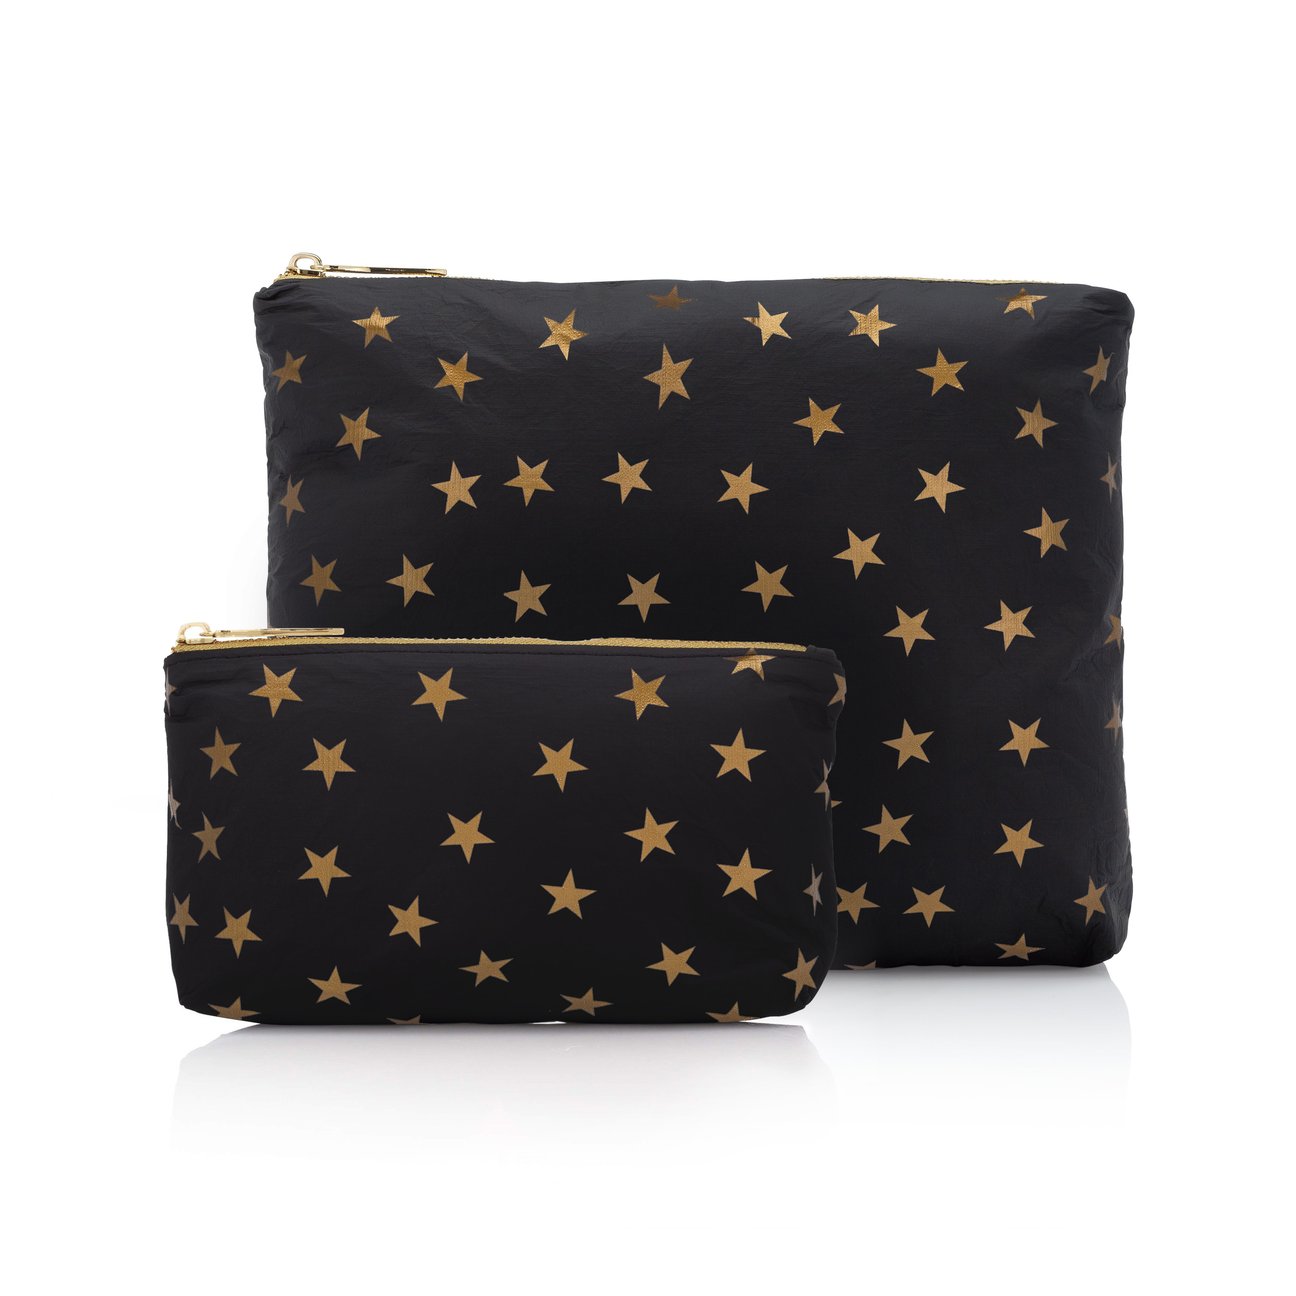 Set of Two - Black with Myriad Gold Stars